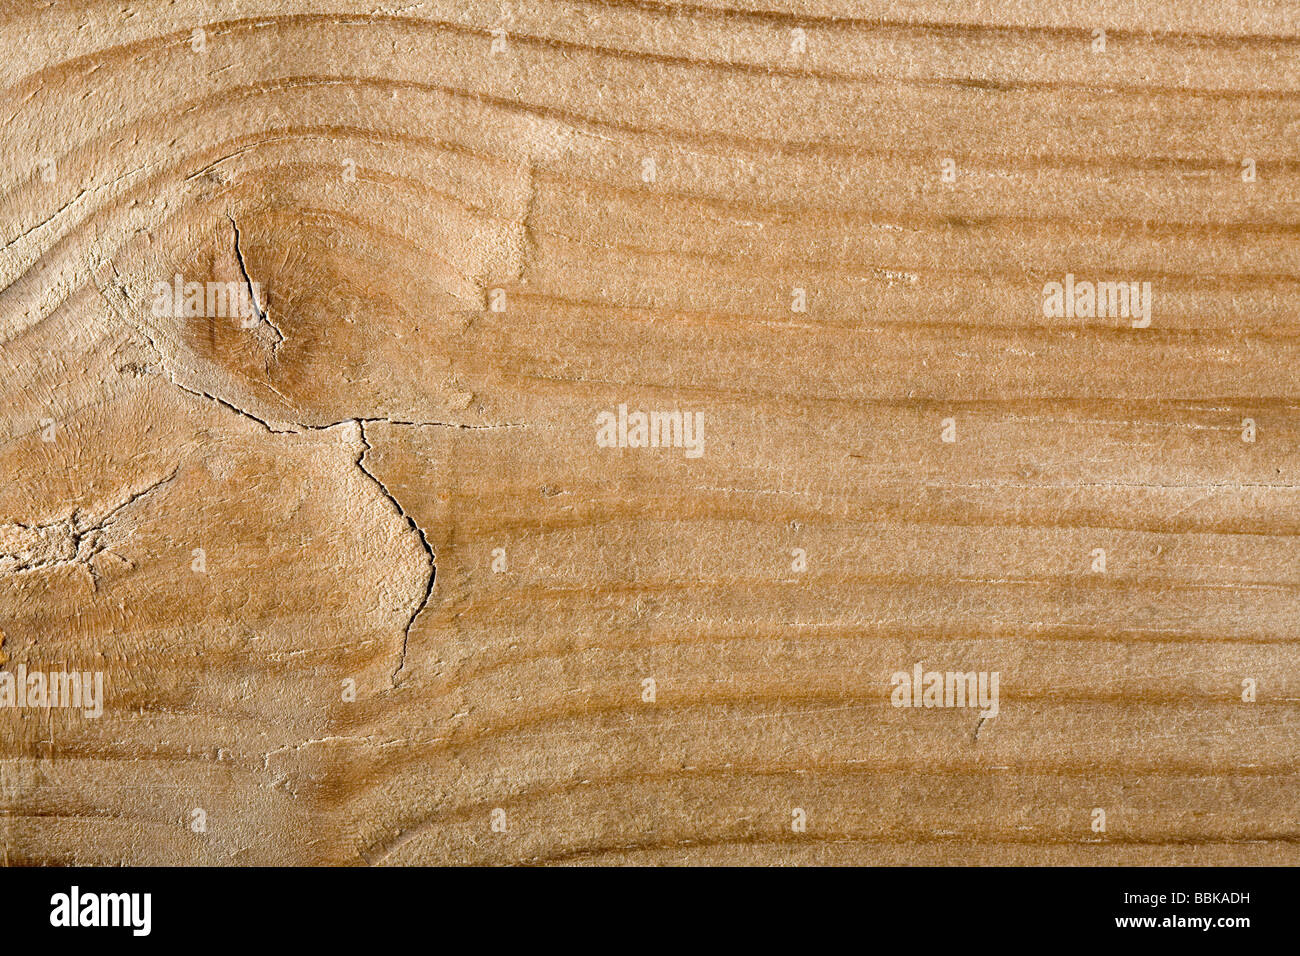 A close up of wood grain with a knot Stock Photo